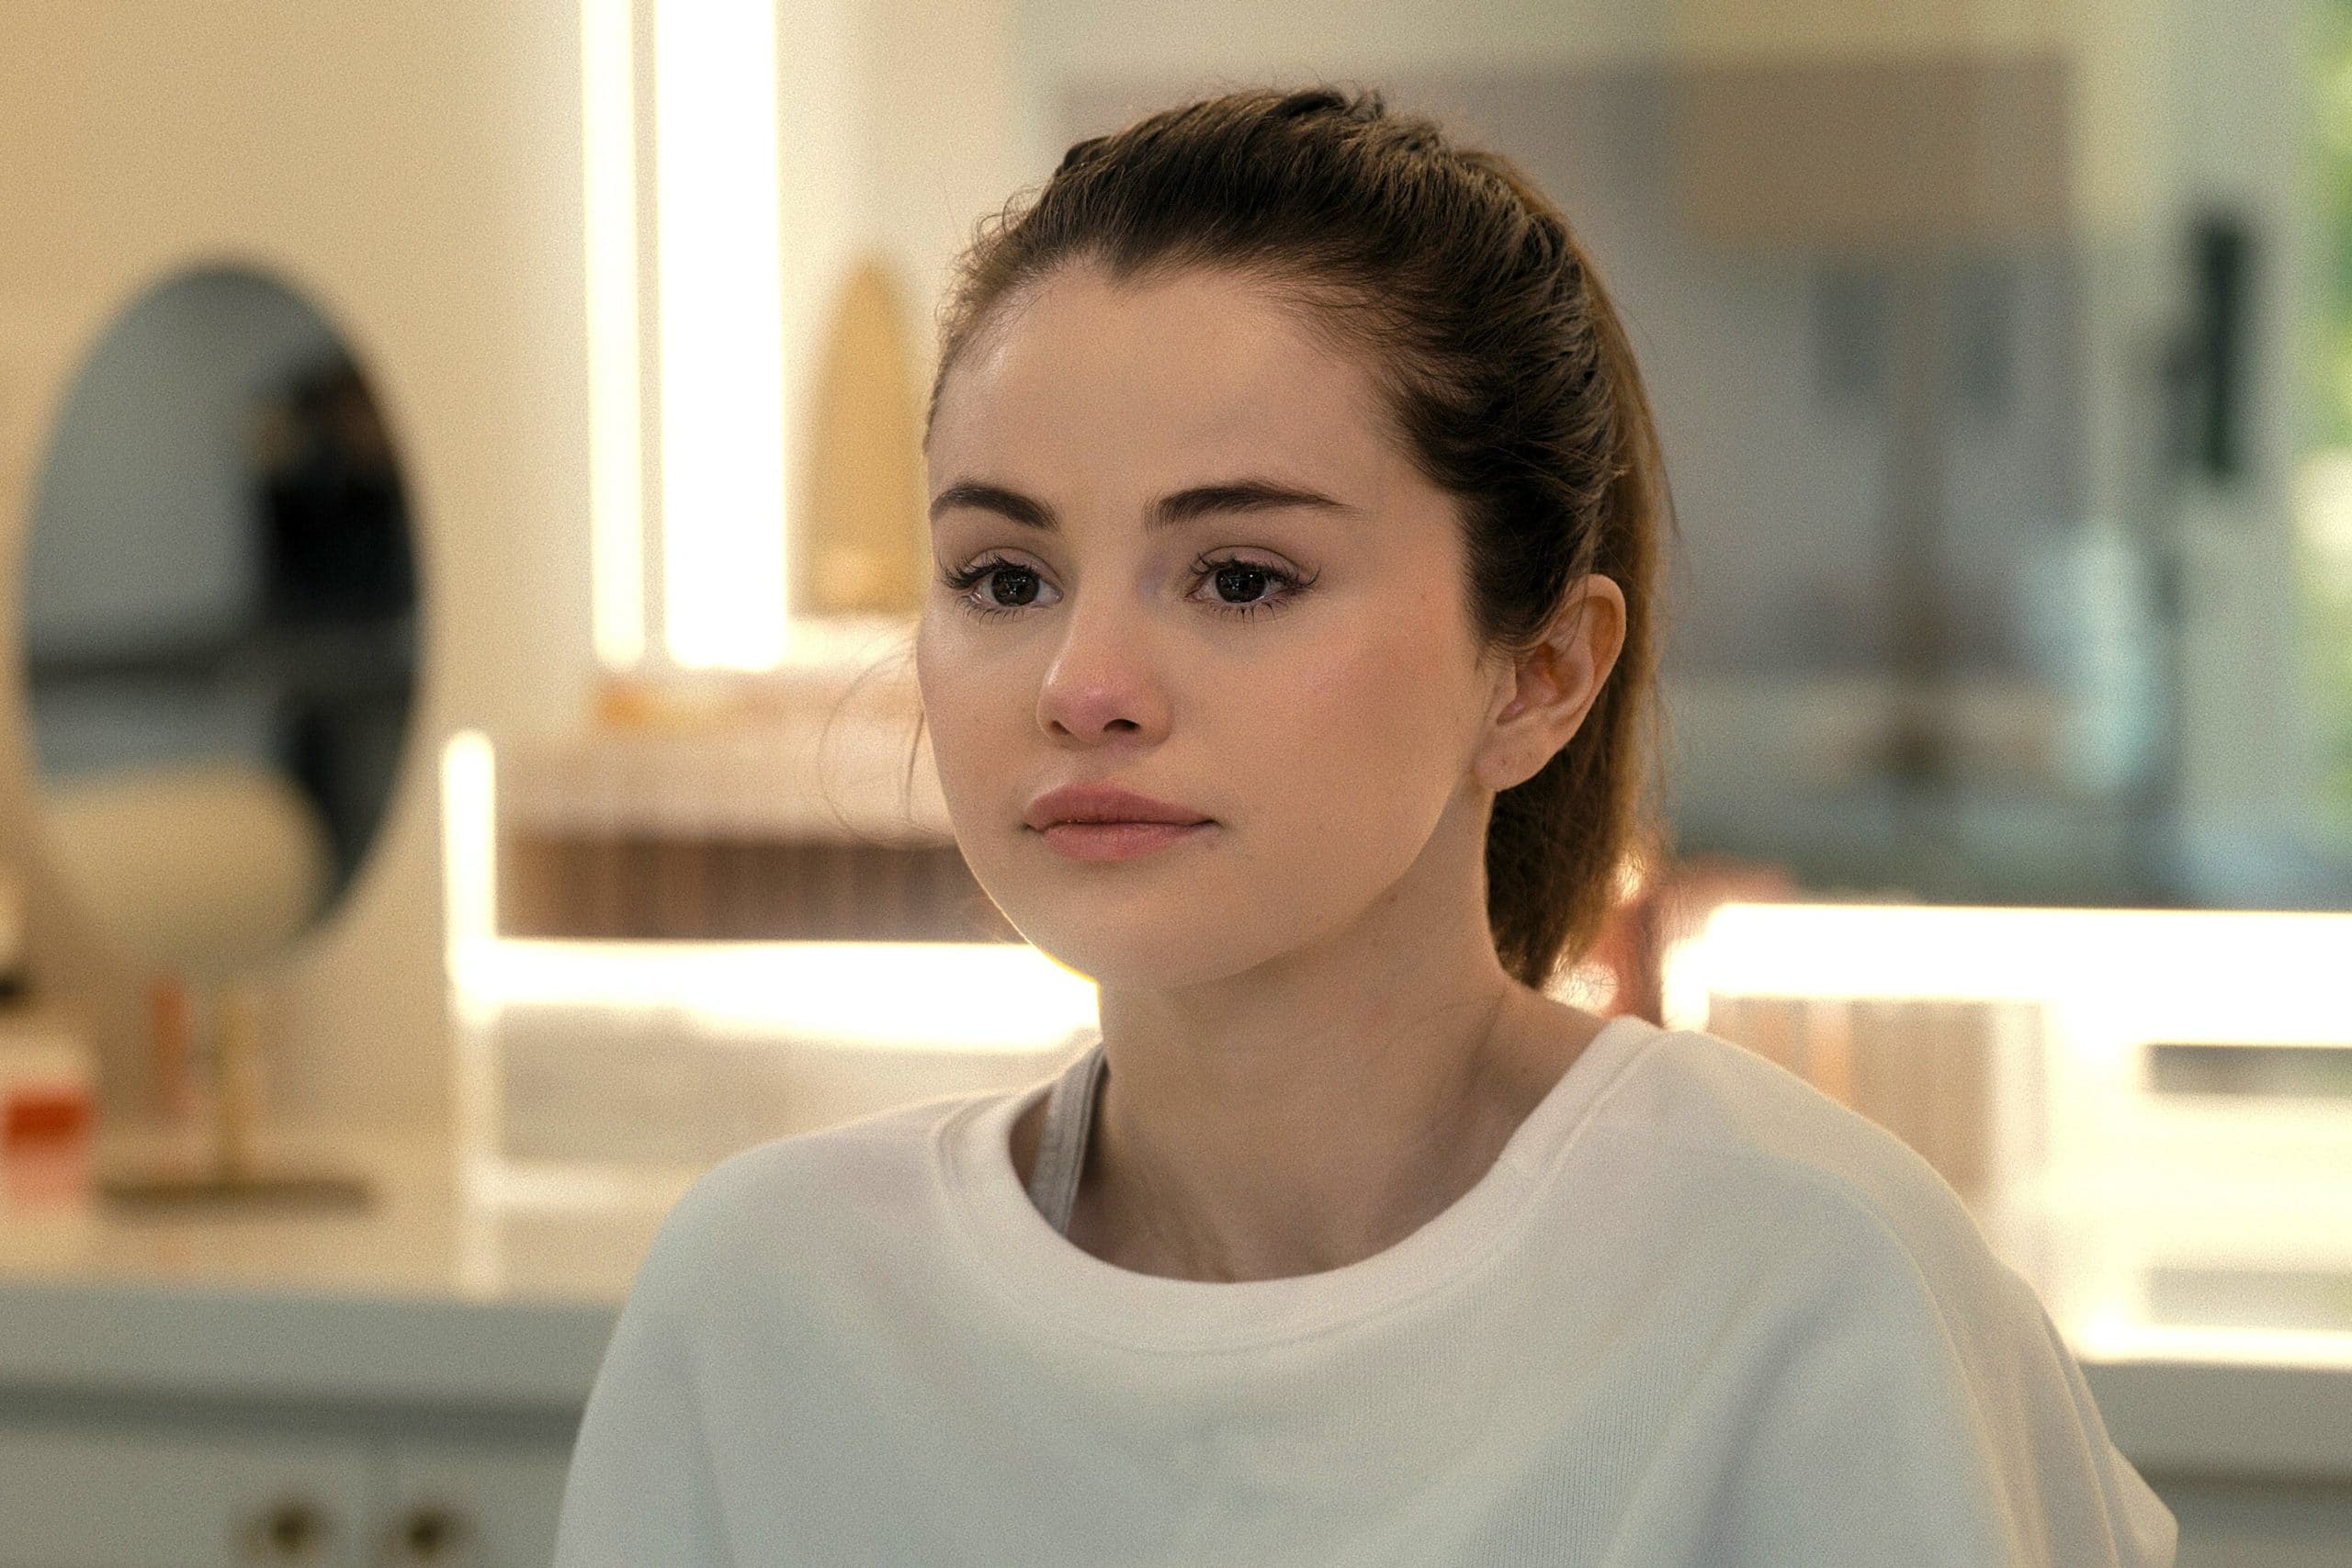 Selena Gomez's Latest Music Video Proves the Power of Kindness